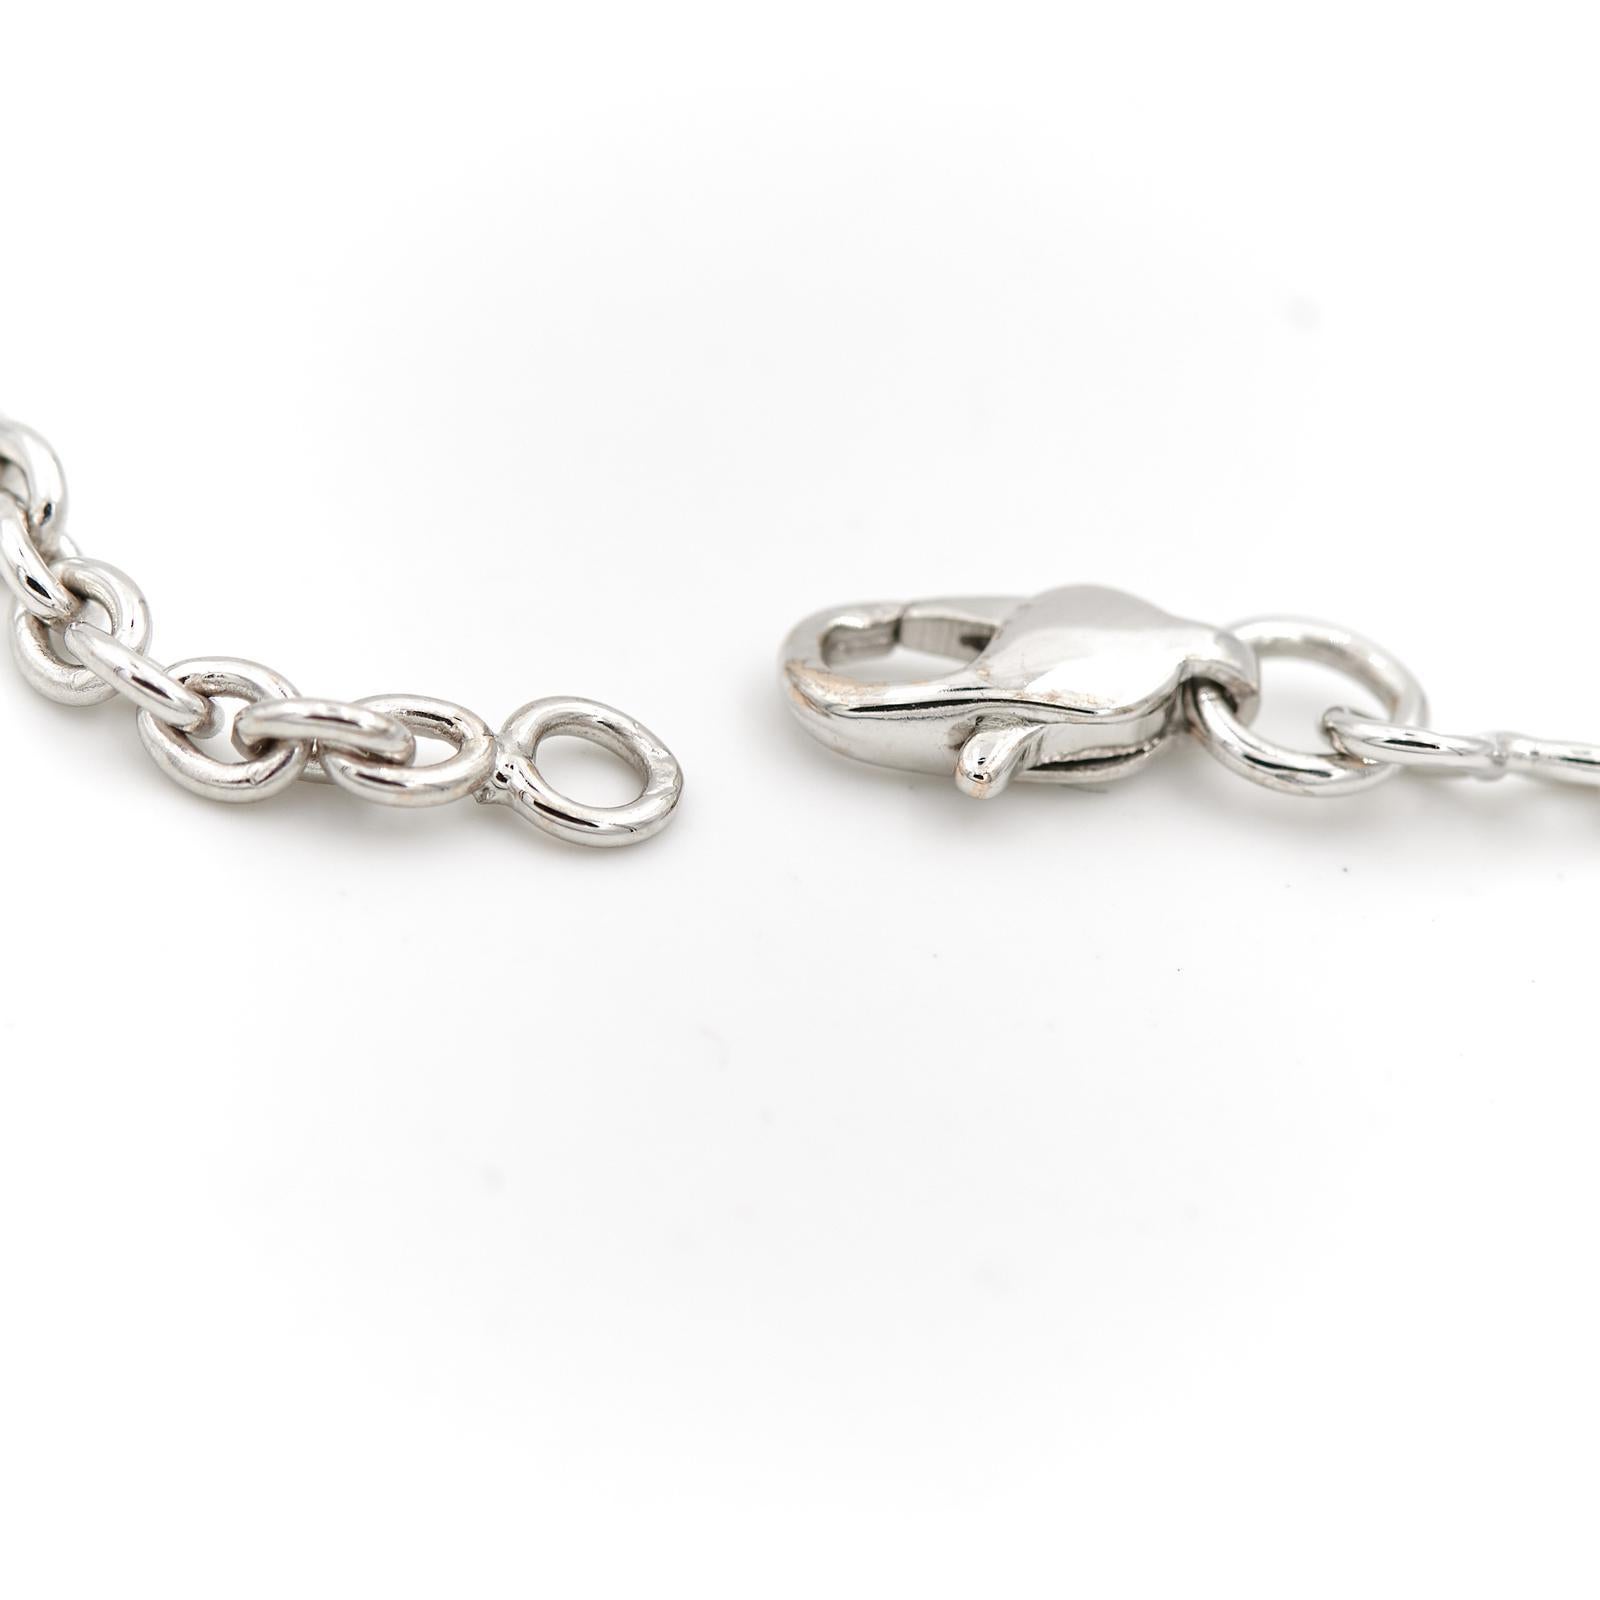 Chain Necklace White Gold For Sale 2